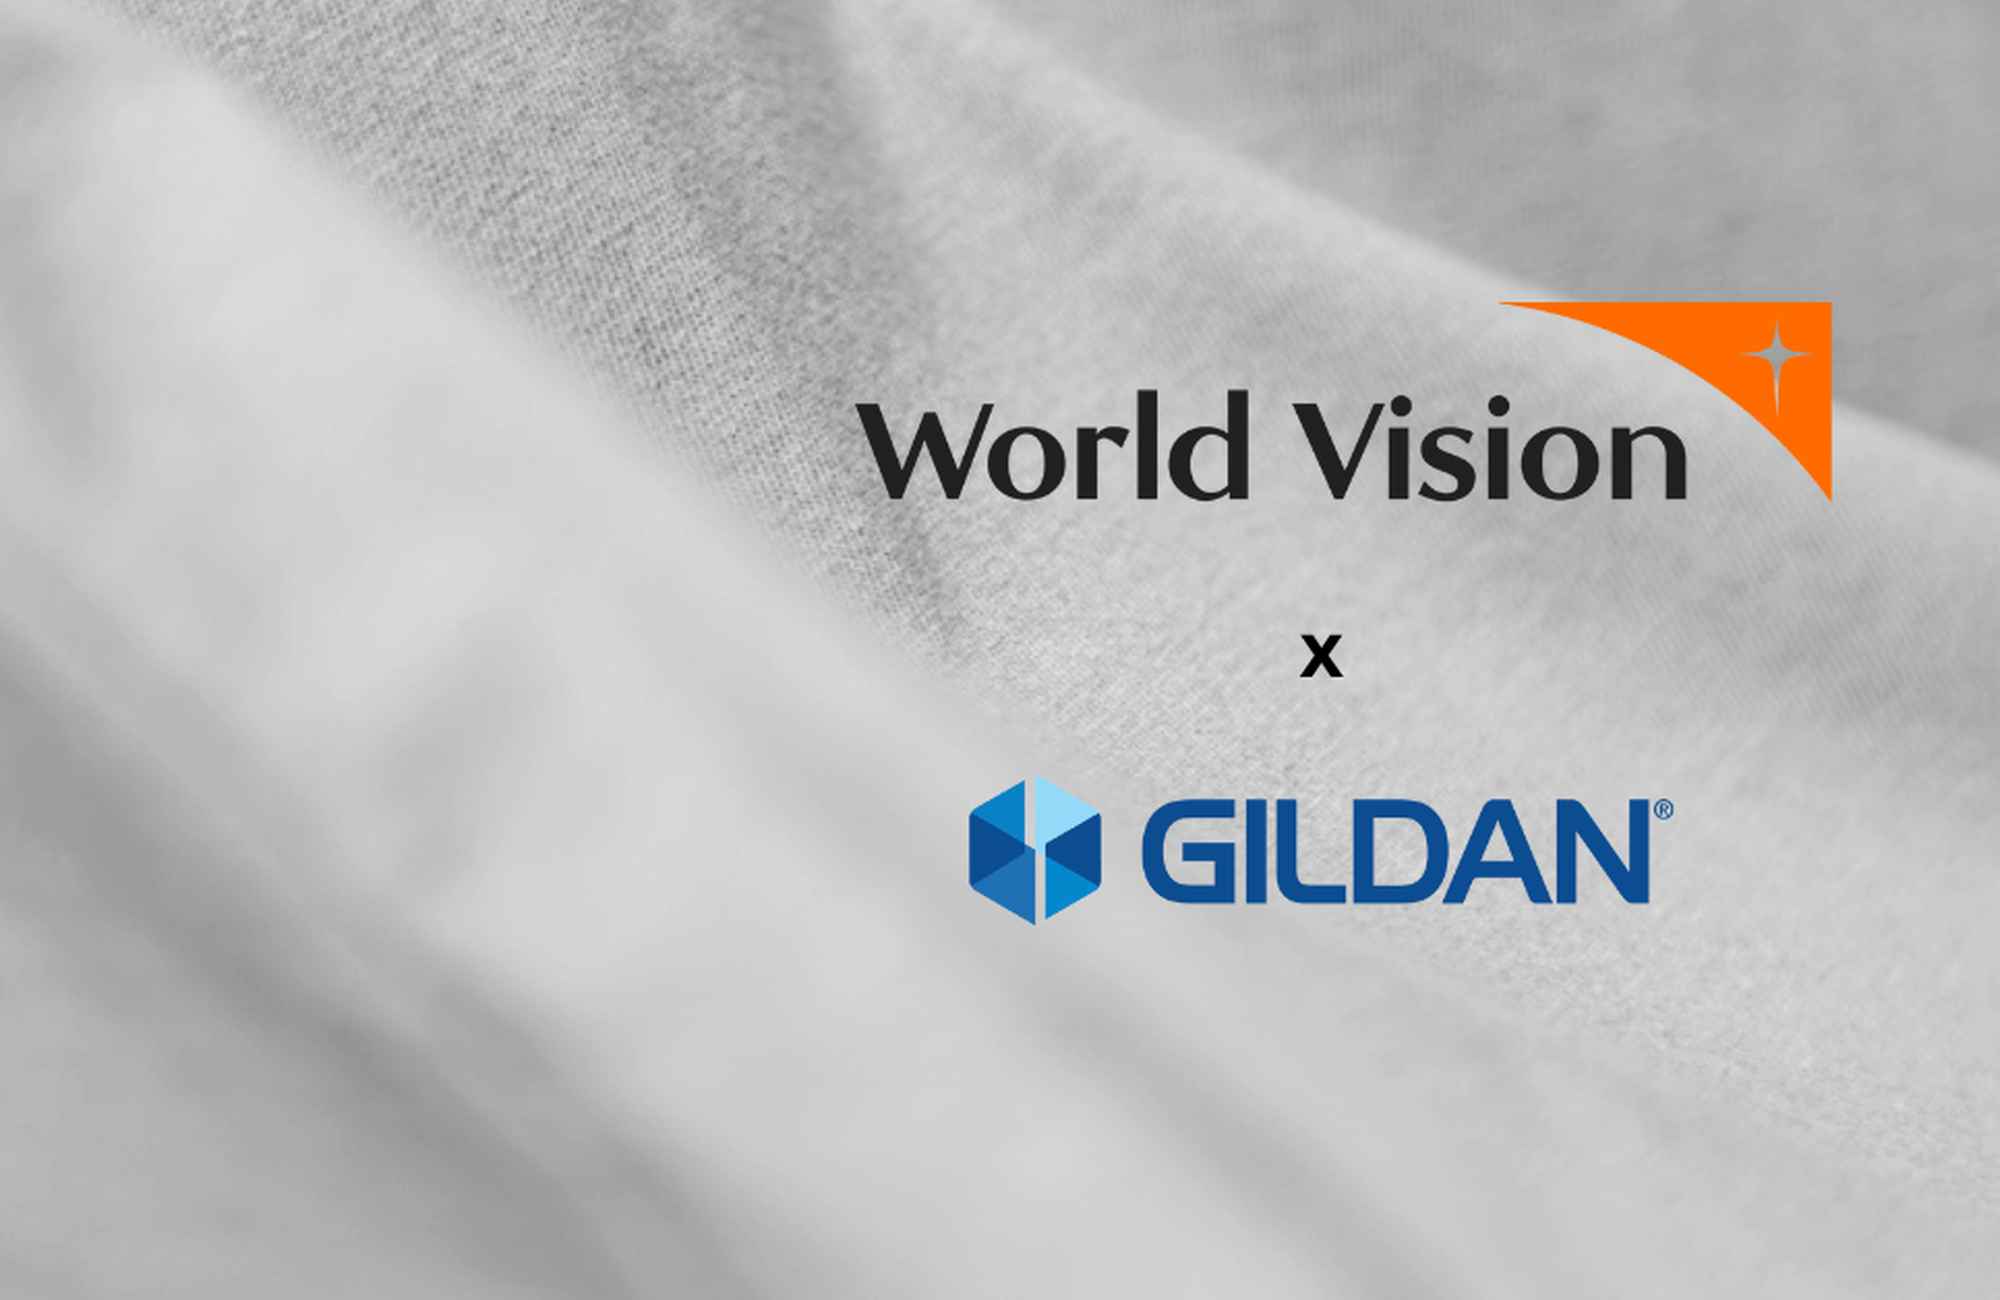 Gildan and World Vision logos against a grey fabric background